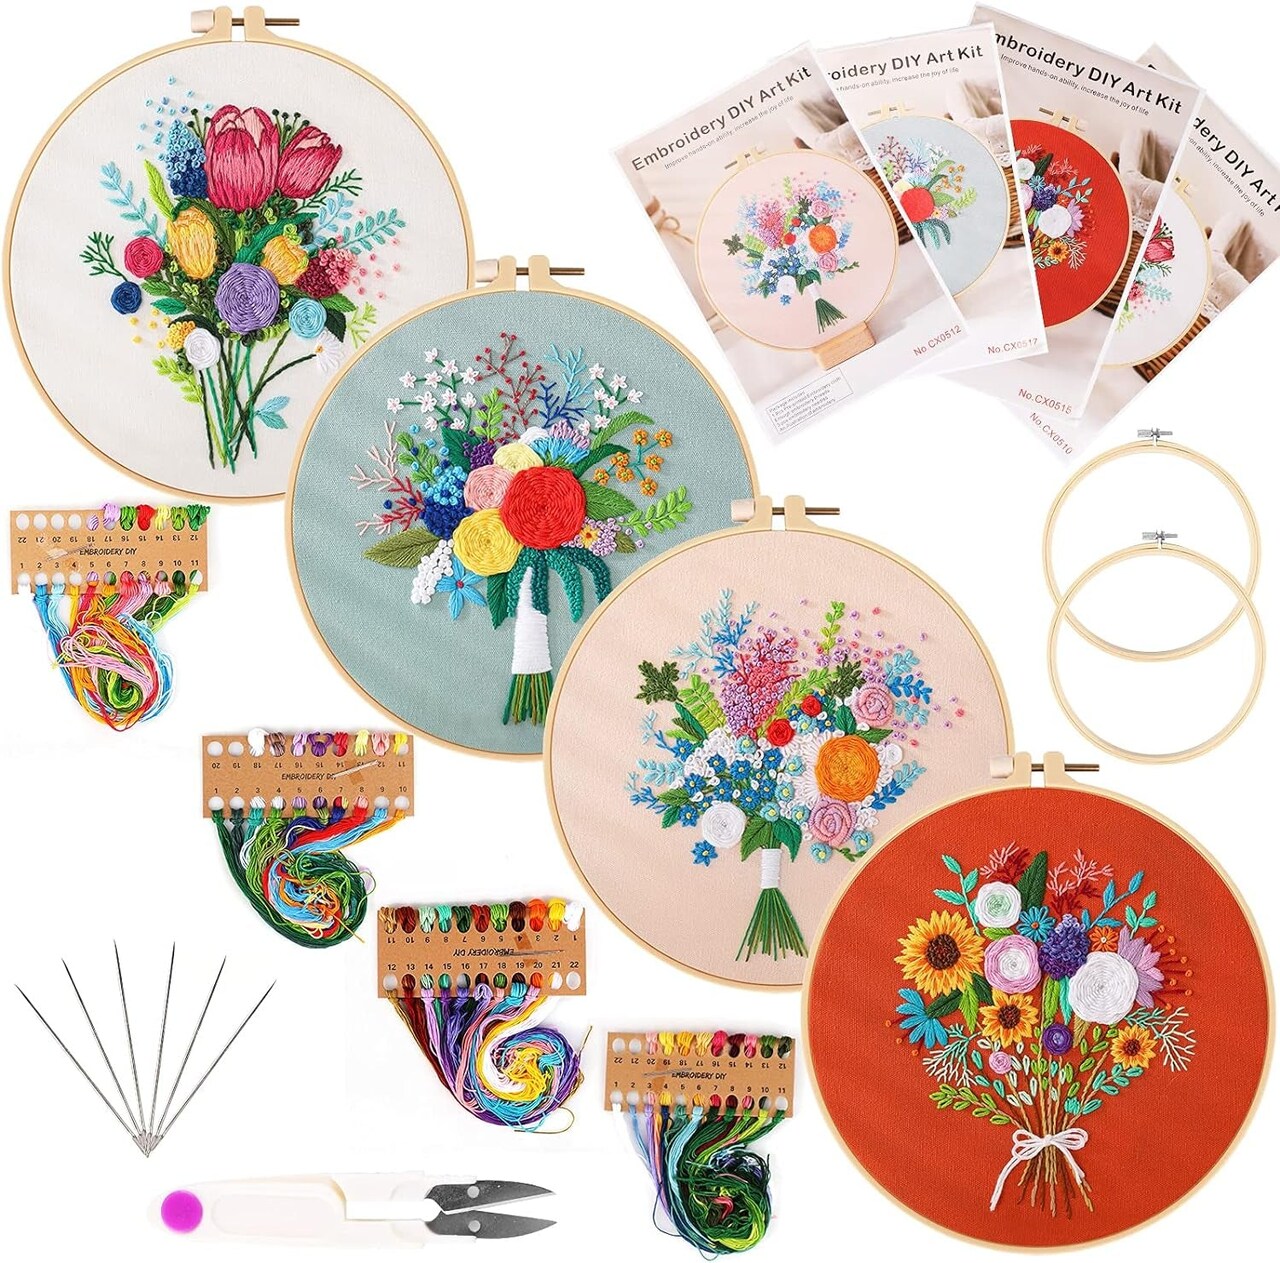 Embroidery Starters Kit with Pattern for Beginners, 4 Pack Cross Stitch  Kits, 2 Wooden Embroidery Hoops,Scissors,Needles and Color  Threads,Needlepoint